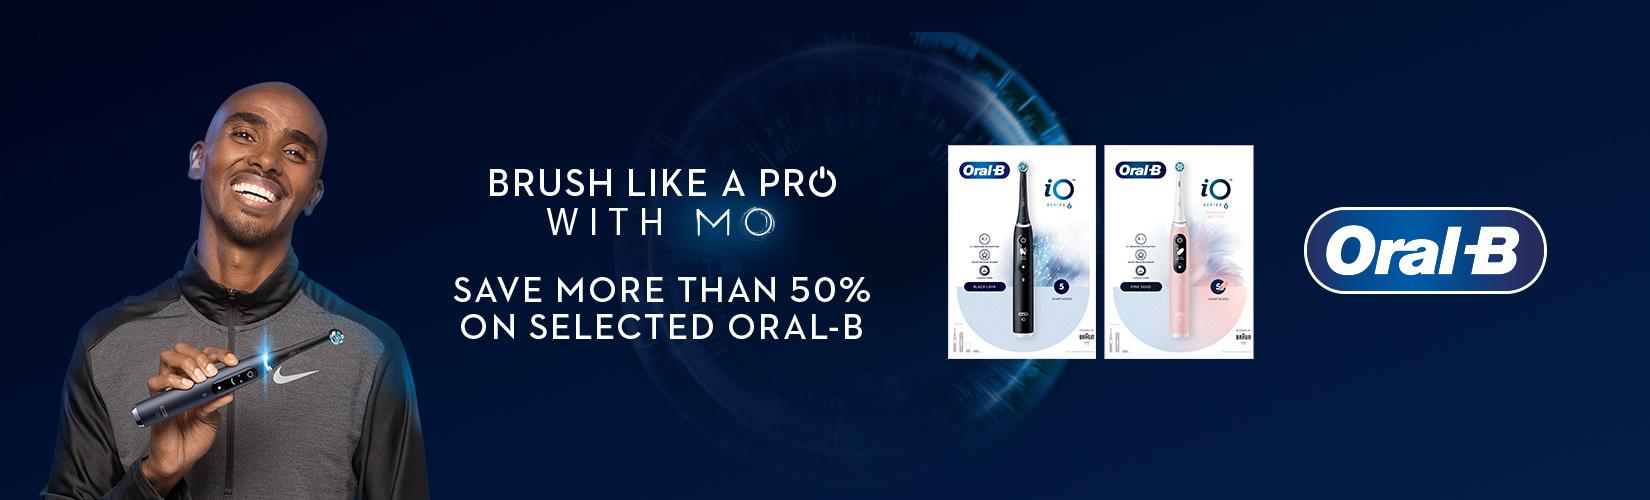 Save more than 50% on selected Oral-B.